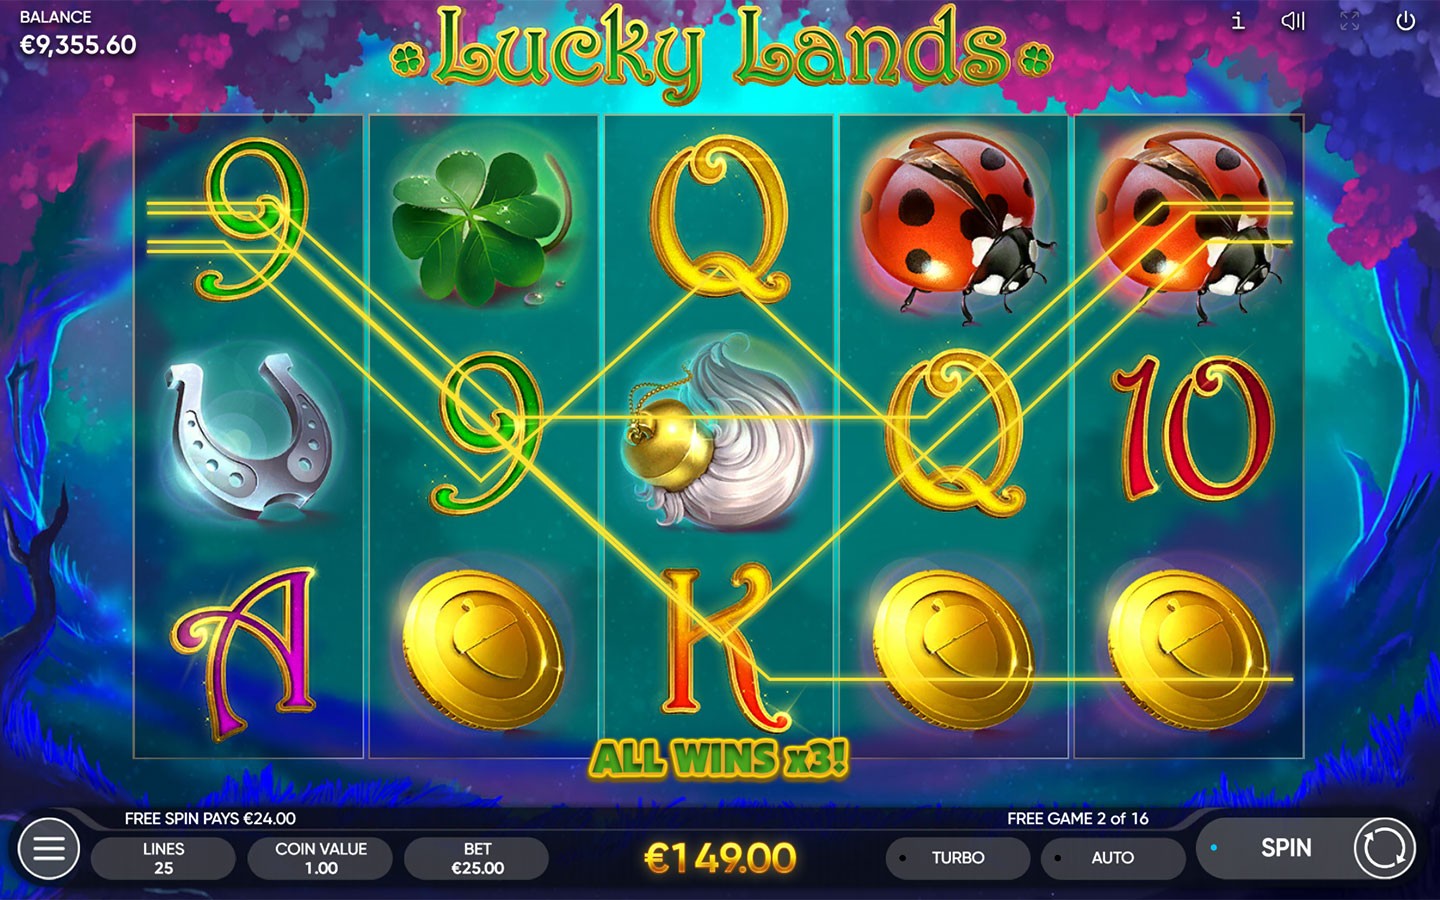 The Best Gaming Software Providers At Irish Slot Sites